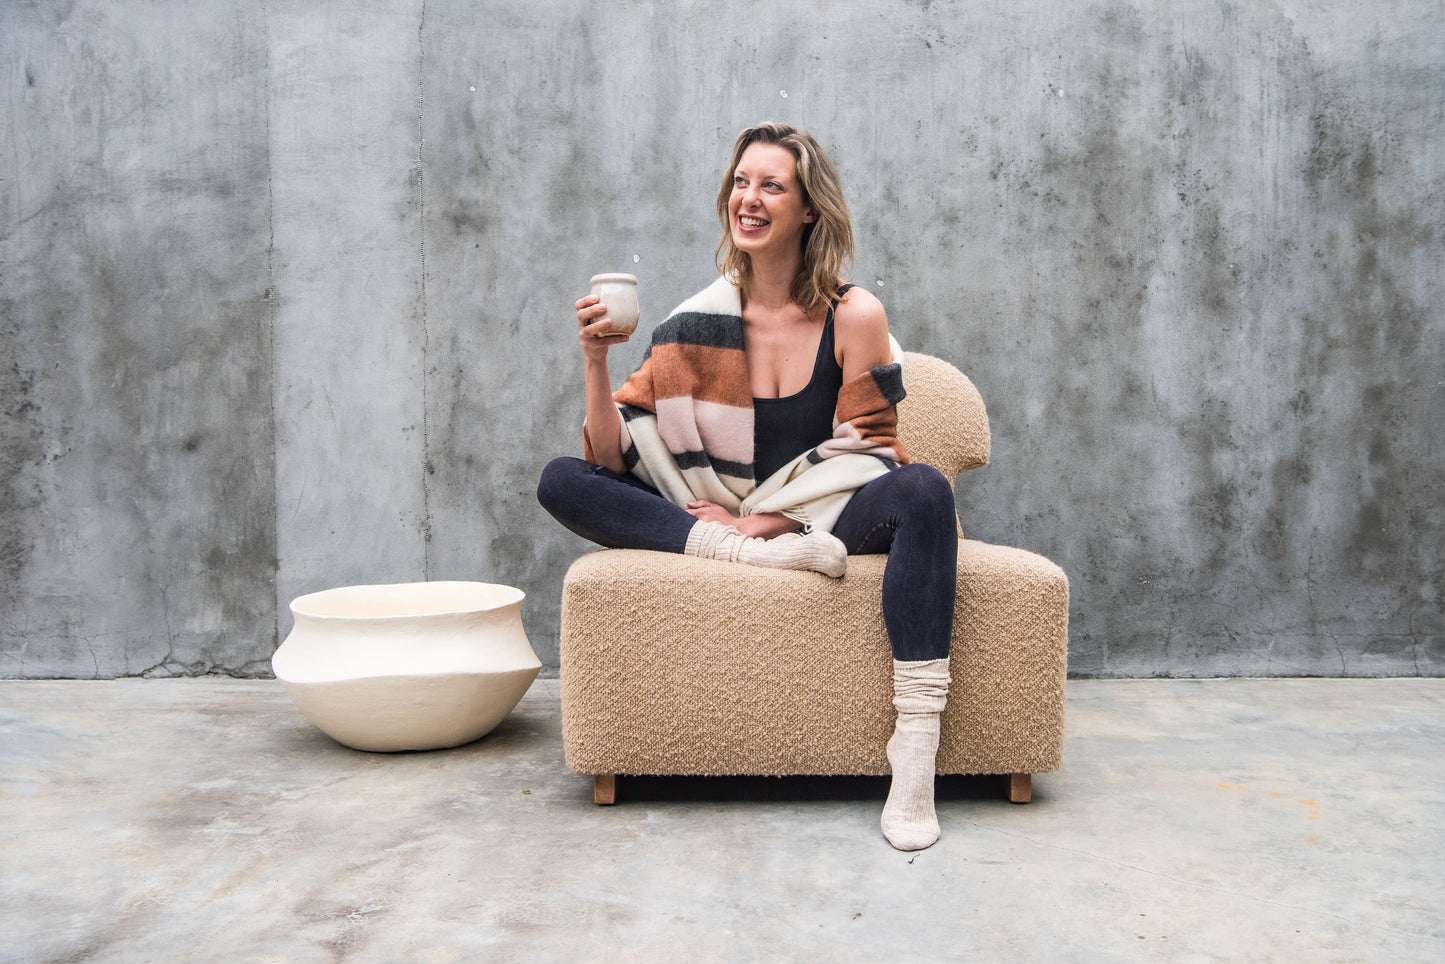 Women drinking tea and appearing happy while sitting in a relaxed position on Dune-colored bouclé Meditation Chair by Rue and Williams Home. Modern design with no arms and a curved back, perfect for enhancing mindfulness practices and adding tranquility to any space.